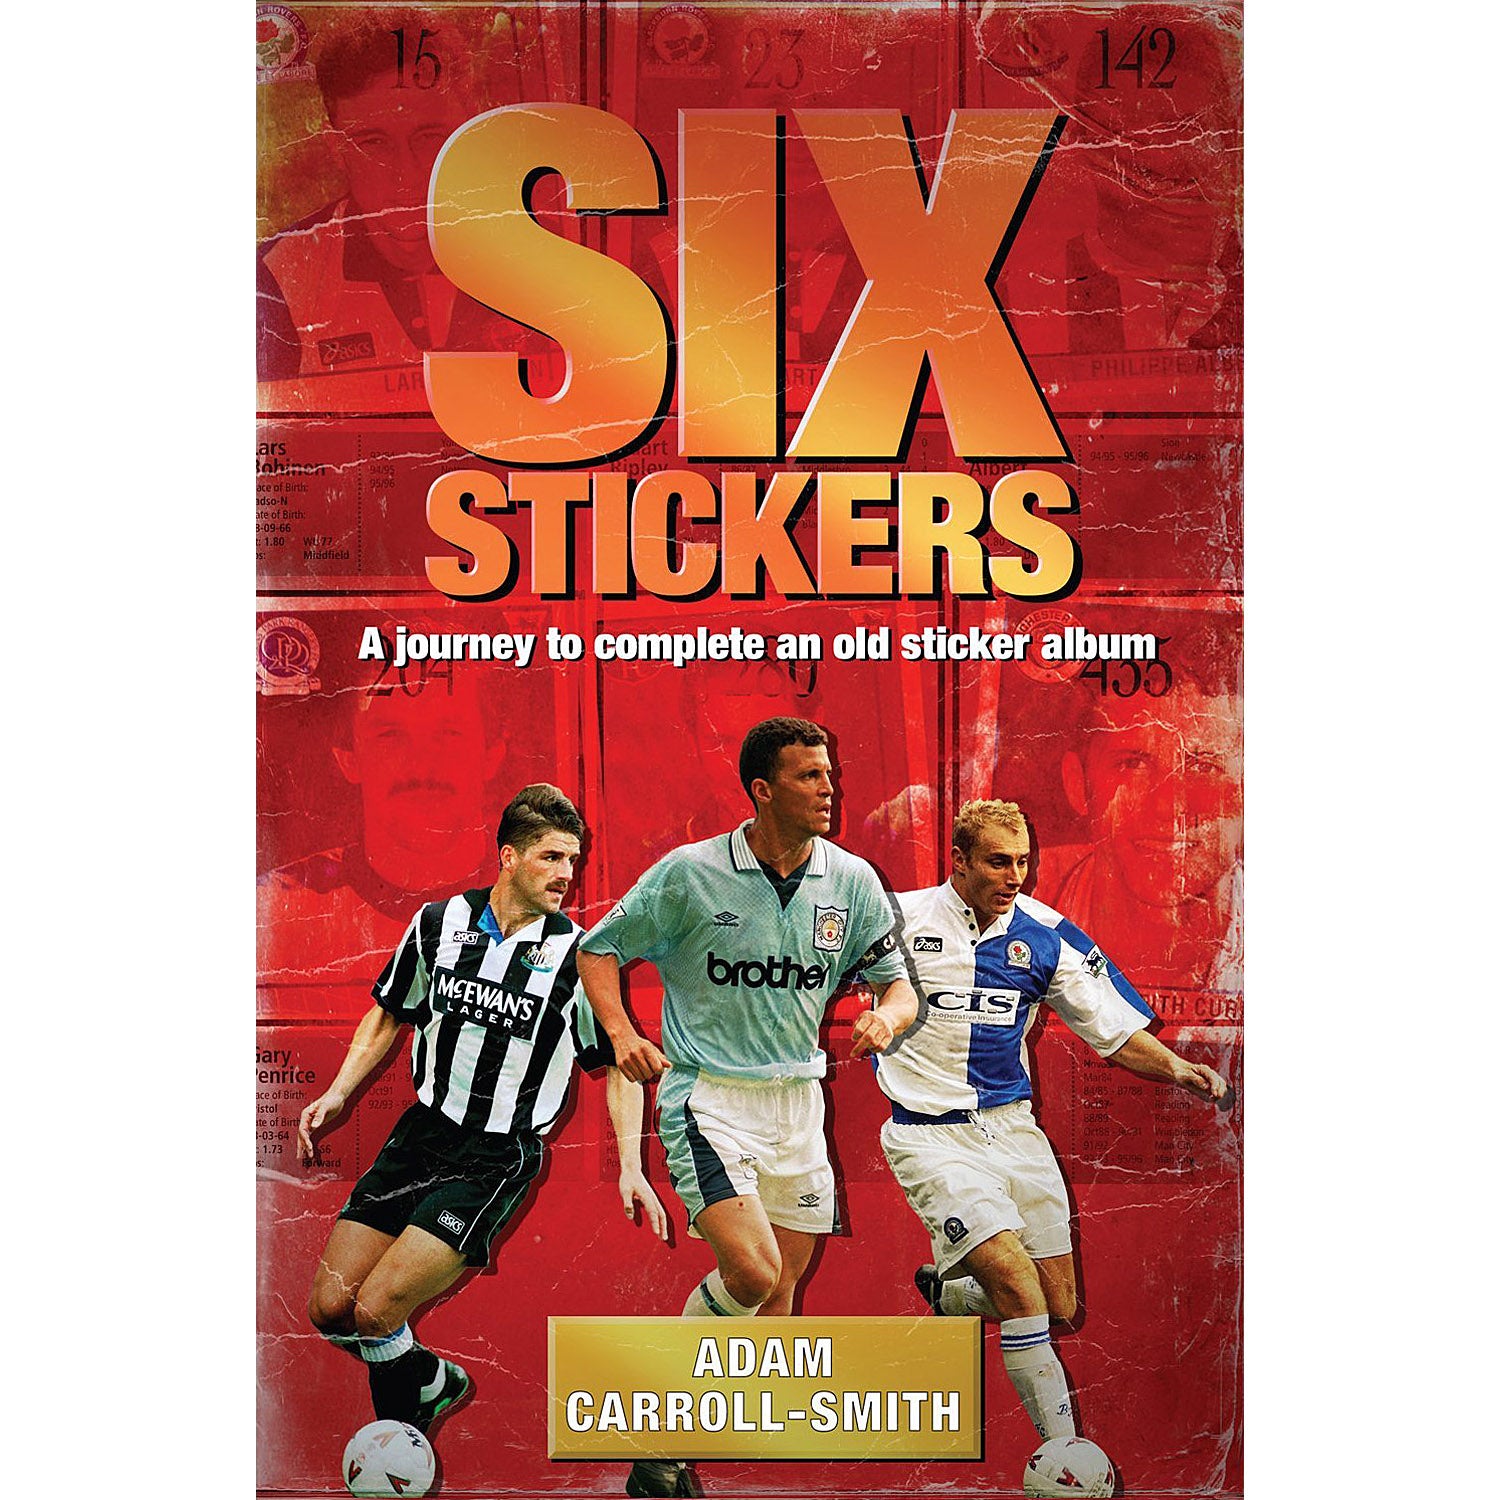 Six Stickers – A journey to complete an old sticker album